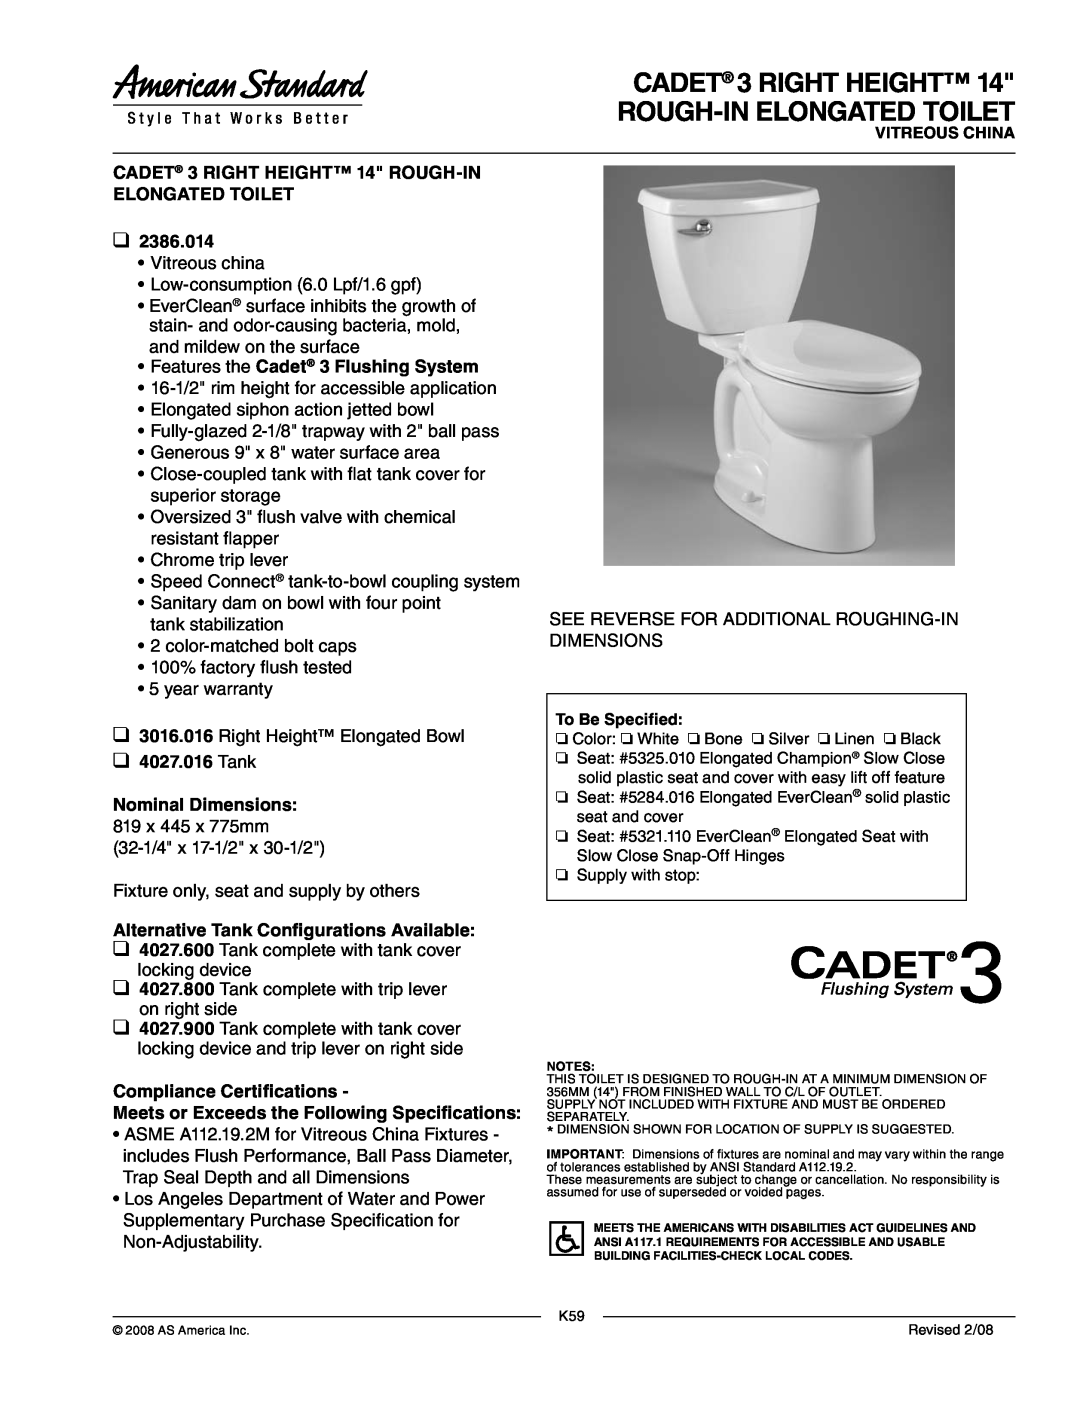 American Standard 2386.014 dimensions CADET 3 RIGHT HEIGHT Rough-inELONGATED TOILET, Features the Cadet 3 Flushing System 